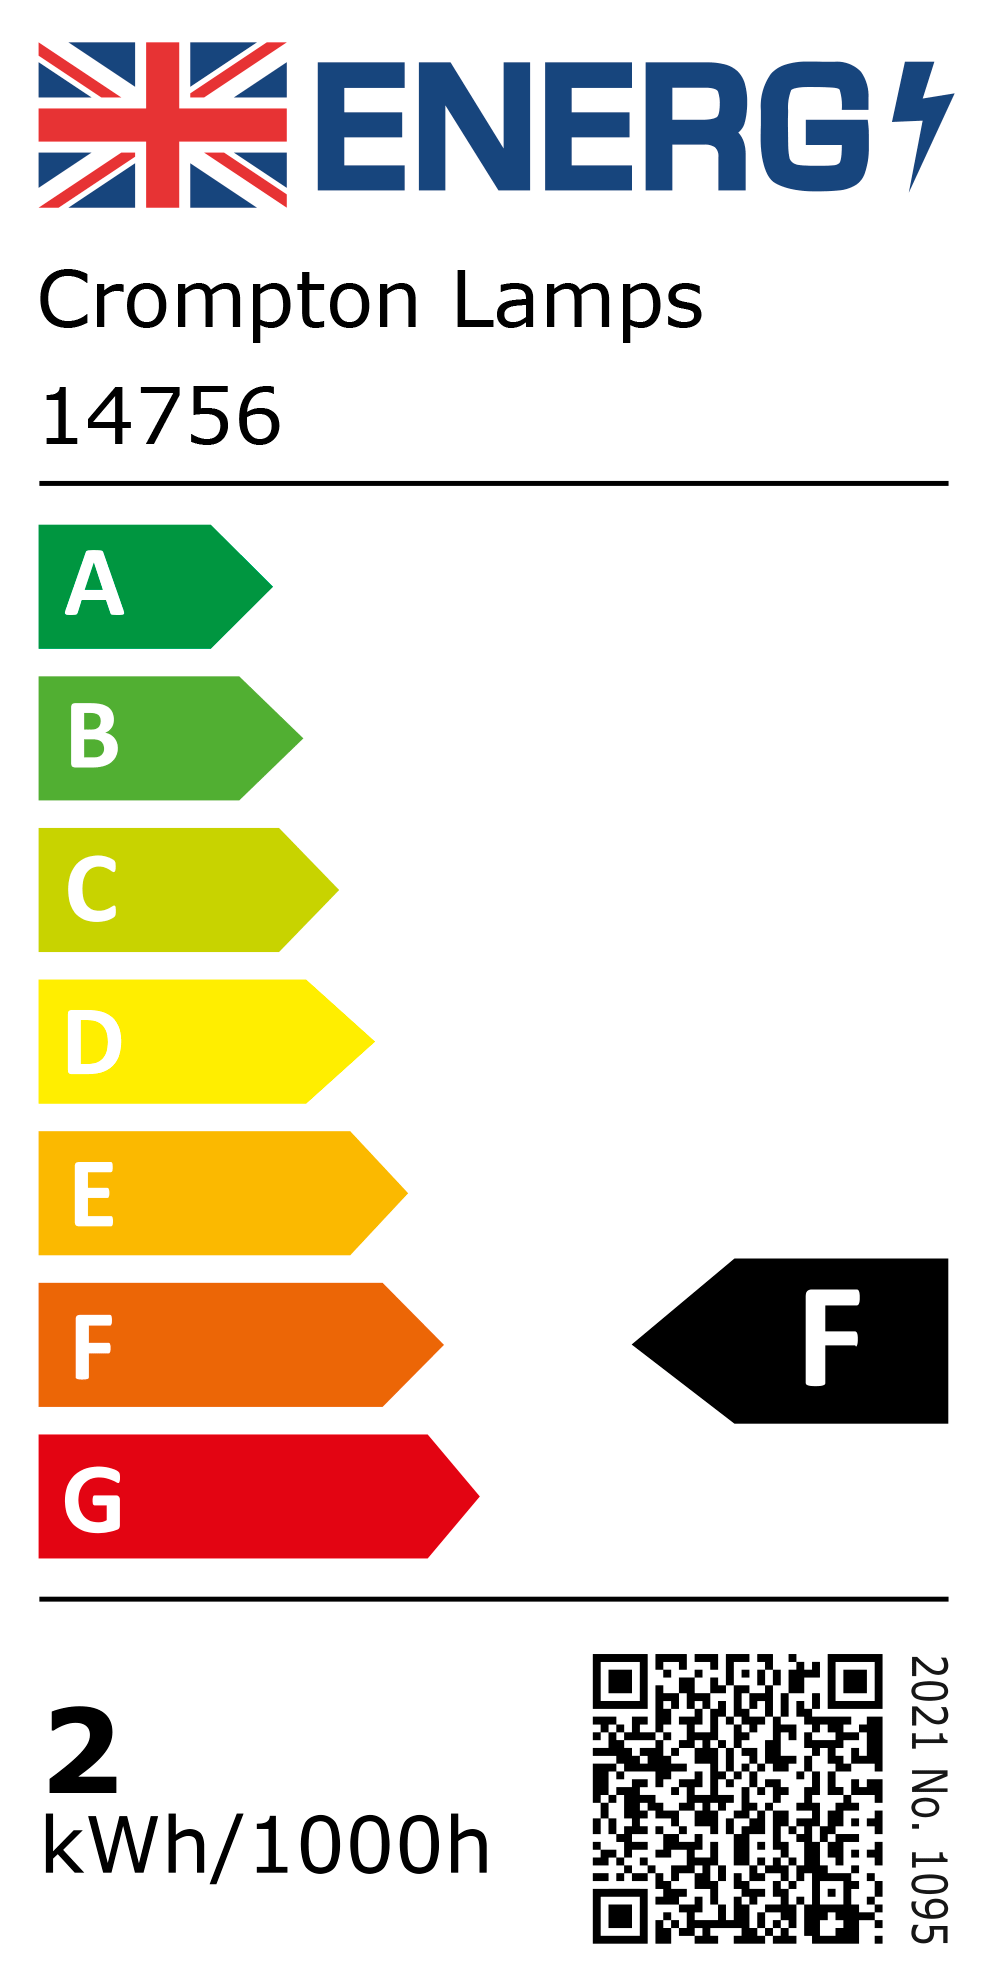 New 2021 Energy Rating Label: Stock Code 14756